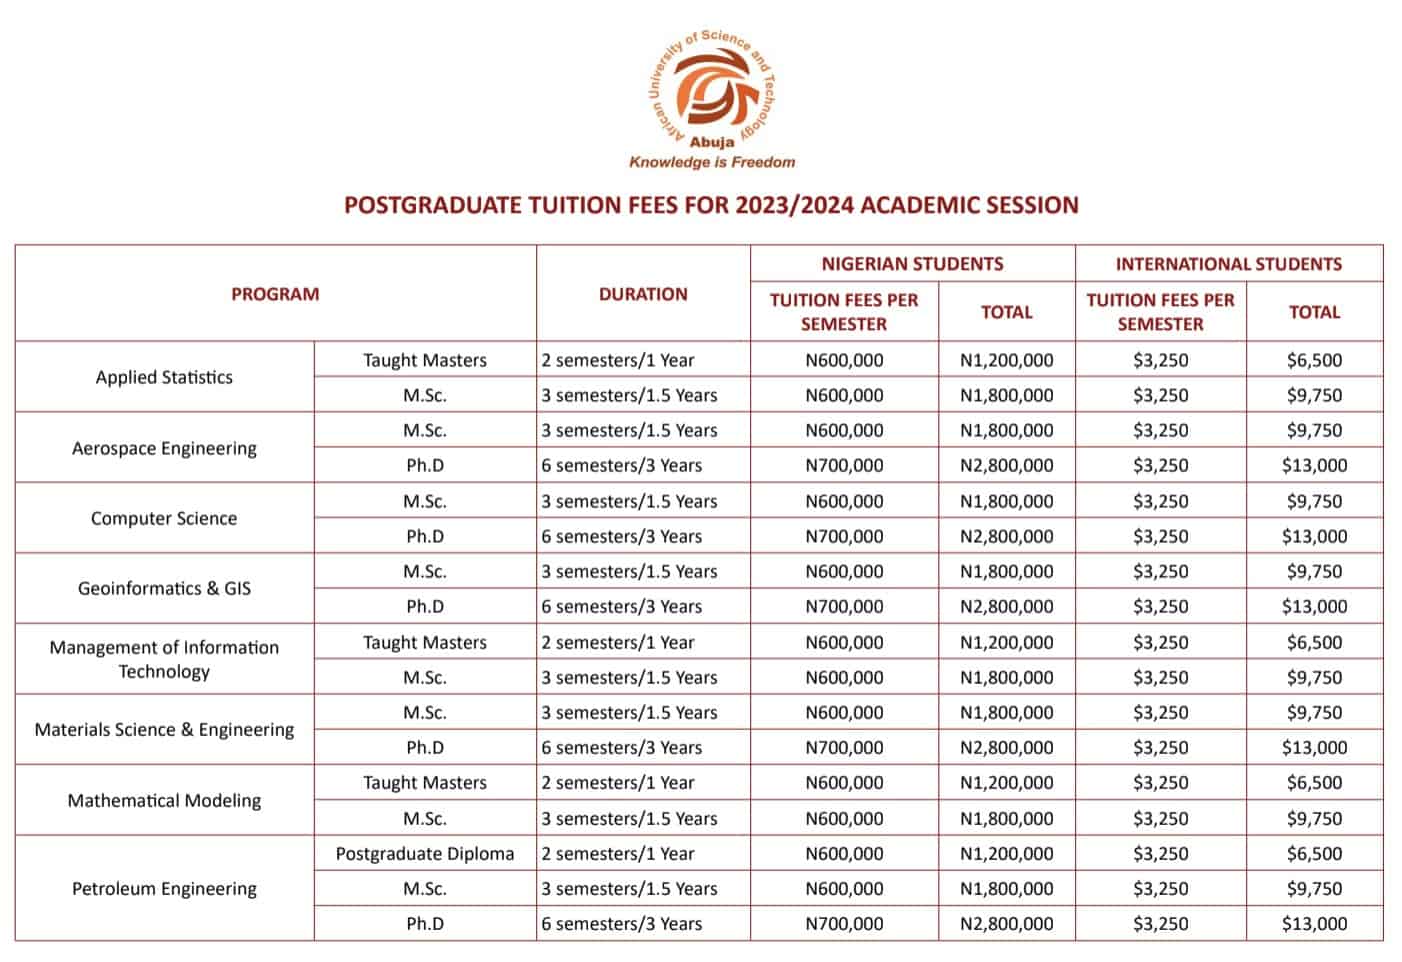 AUST Postgraduate Tuition Fees for 2023:2024 academic session